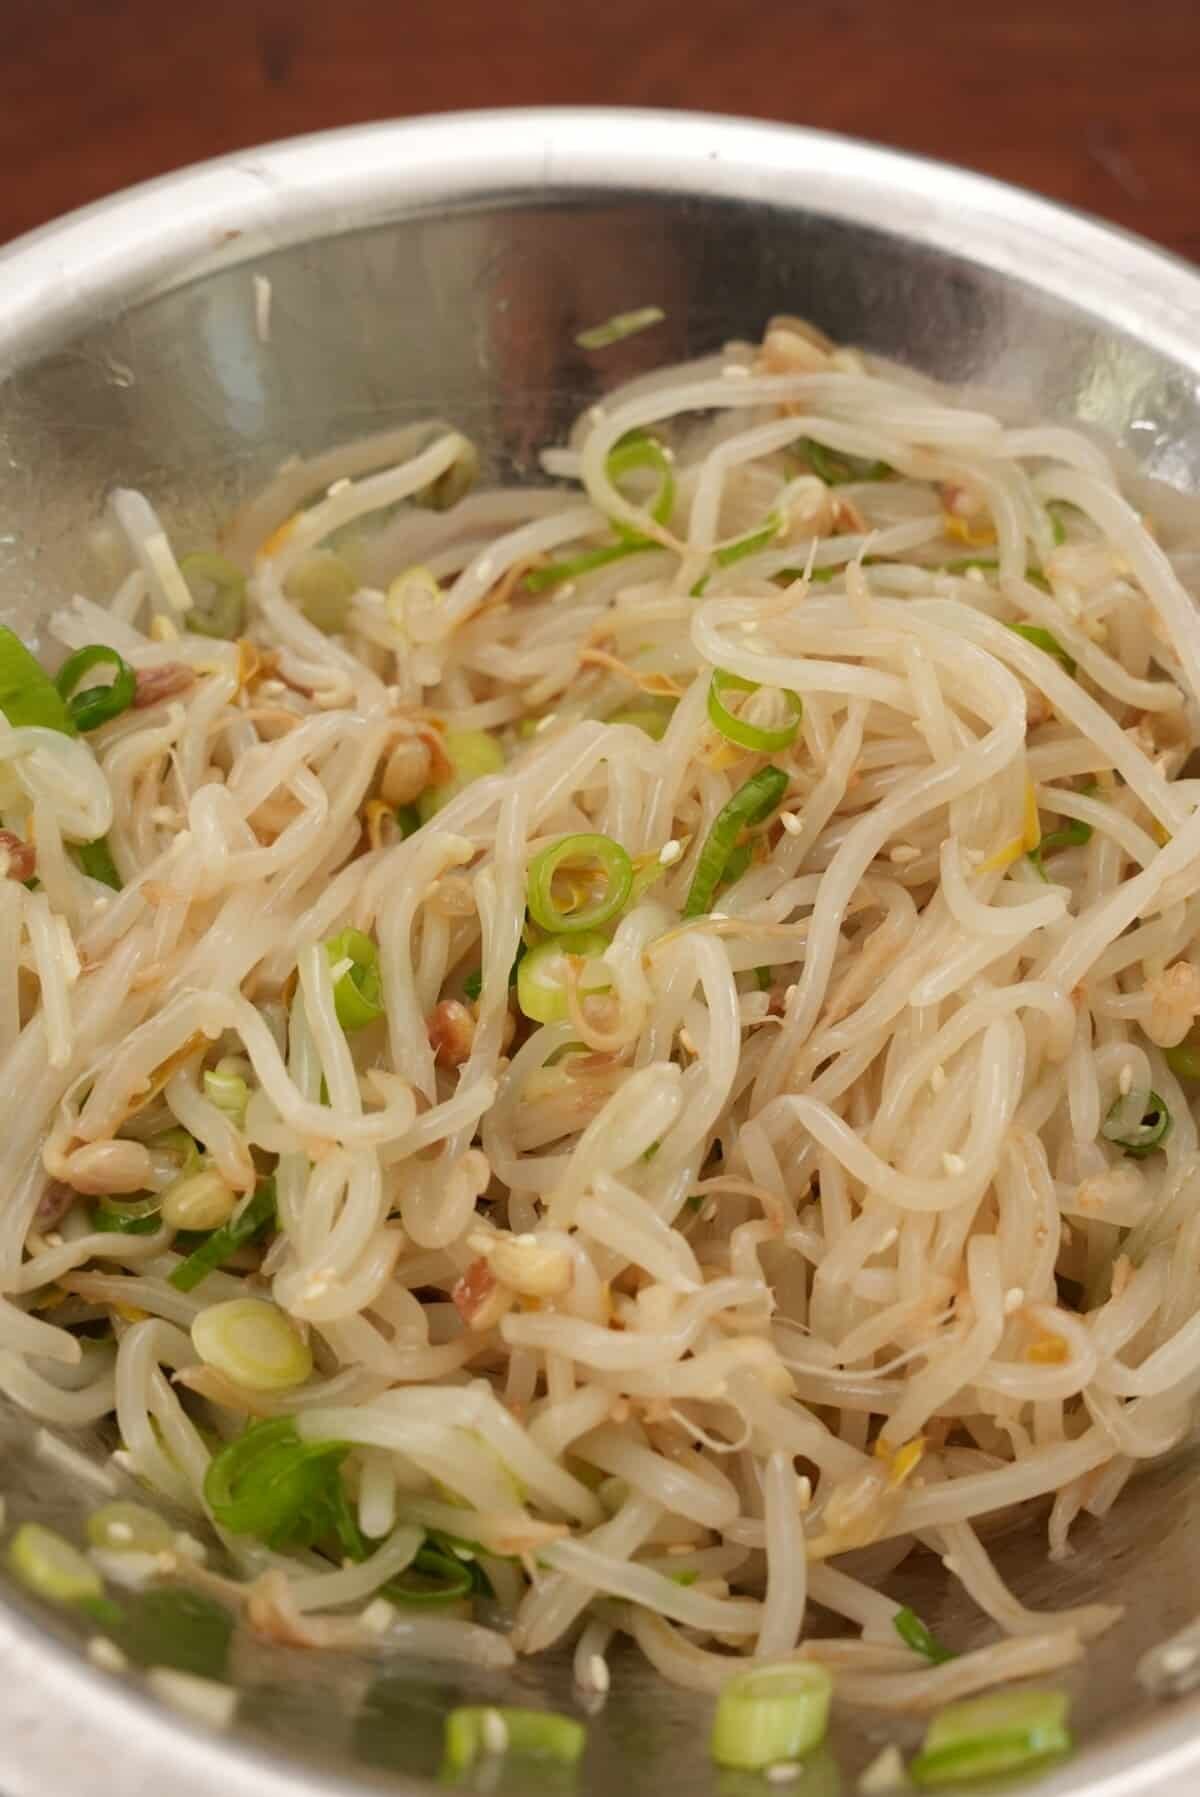 Marinated Korean Bean Sprouts in a metal bowl.